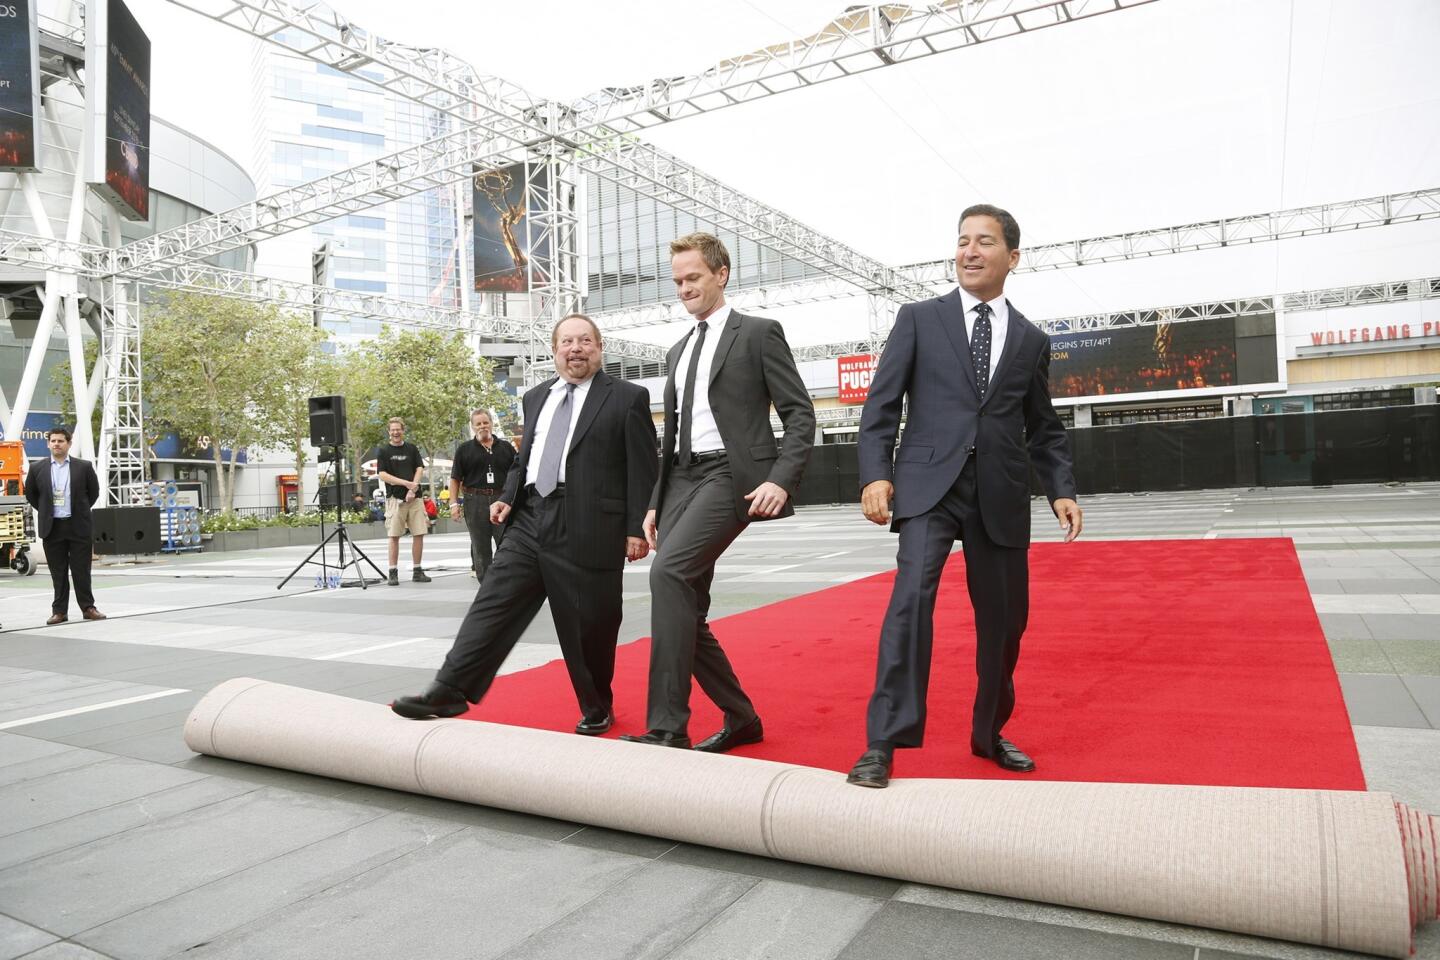 From left, Ken Ehrlich, Television Academy chairman and co-producer of this year's telecast; Neil Patrick Harris, this year's host and co-producer; and Academy of Television Arts & Sciences CEO Bruce Rosenblum roll out the red carpet for the 65th Primetime Emmy Awards at the Nokia Theatre Sunday, airing live on CBS at 5 p.m. PDT.